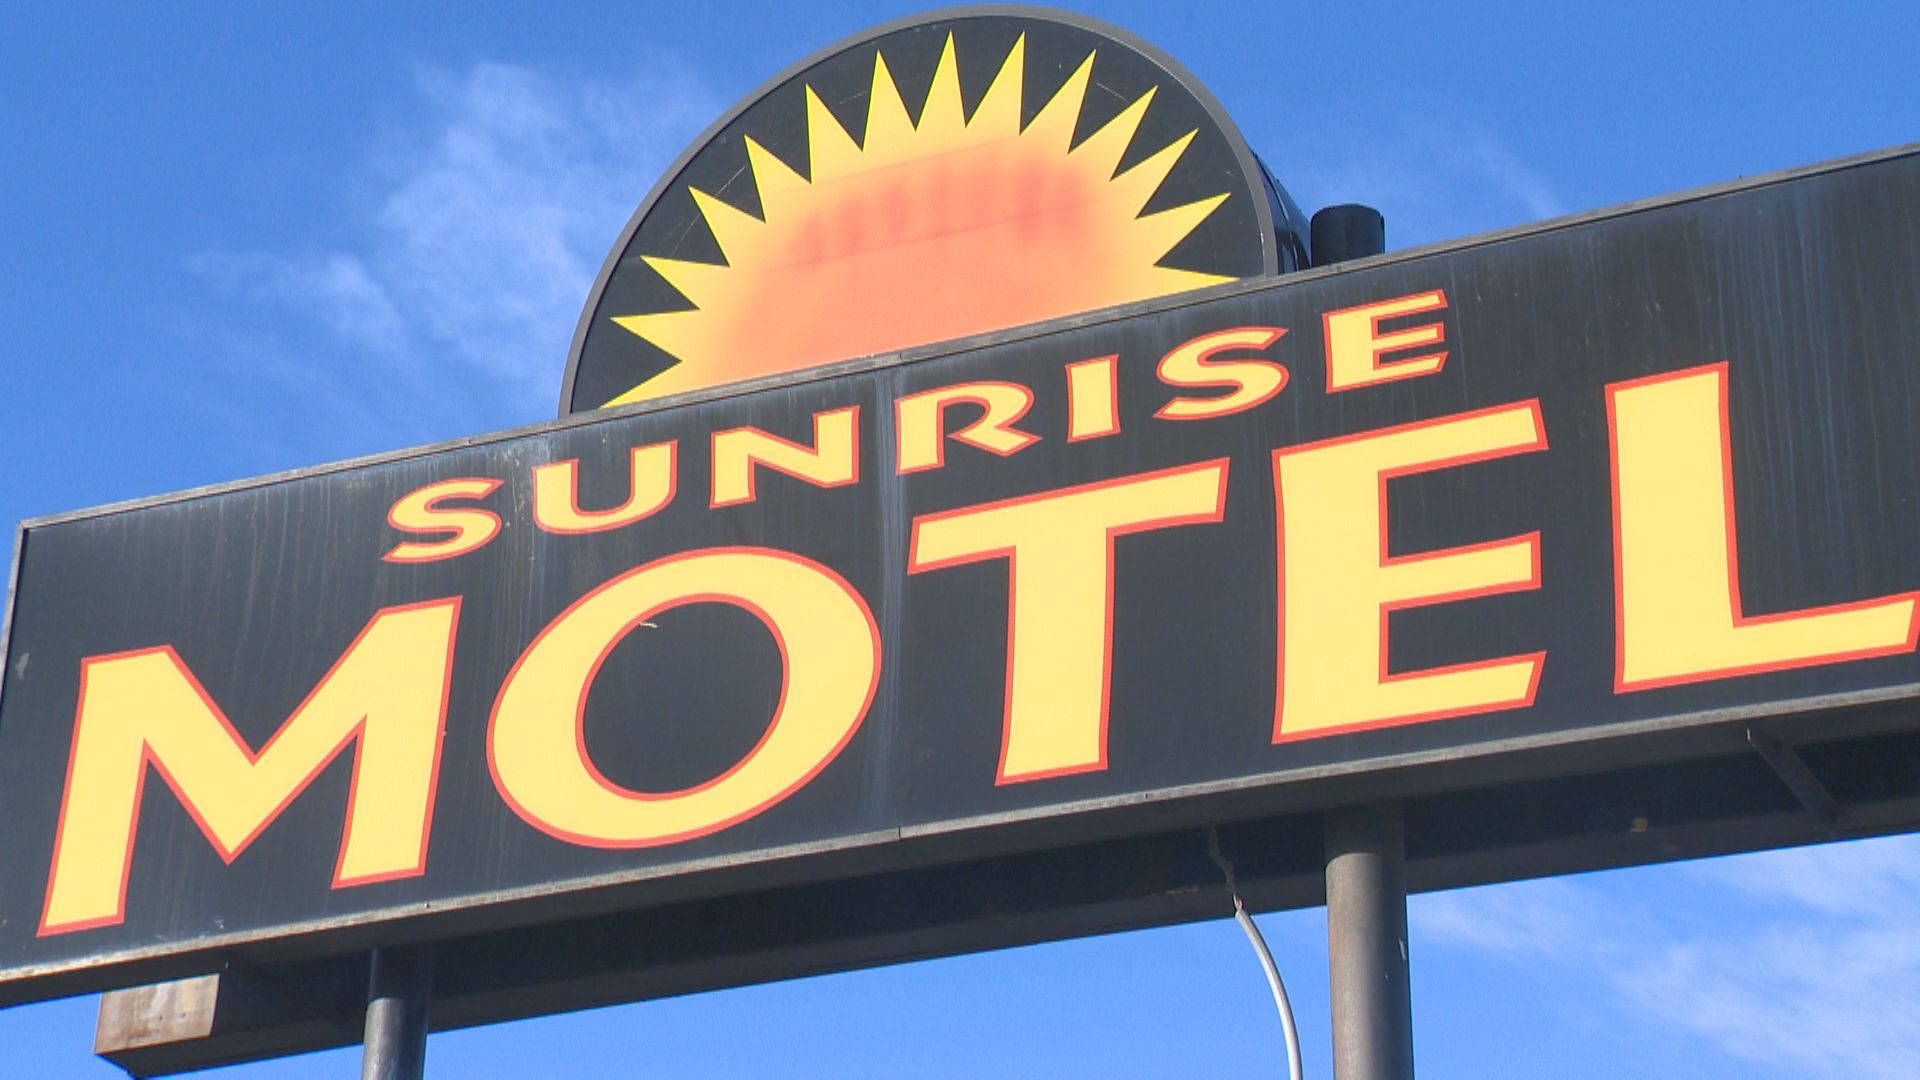 Sask. blocks motion to launch provincial auditor investigation into Sunrise Motel dealings